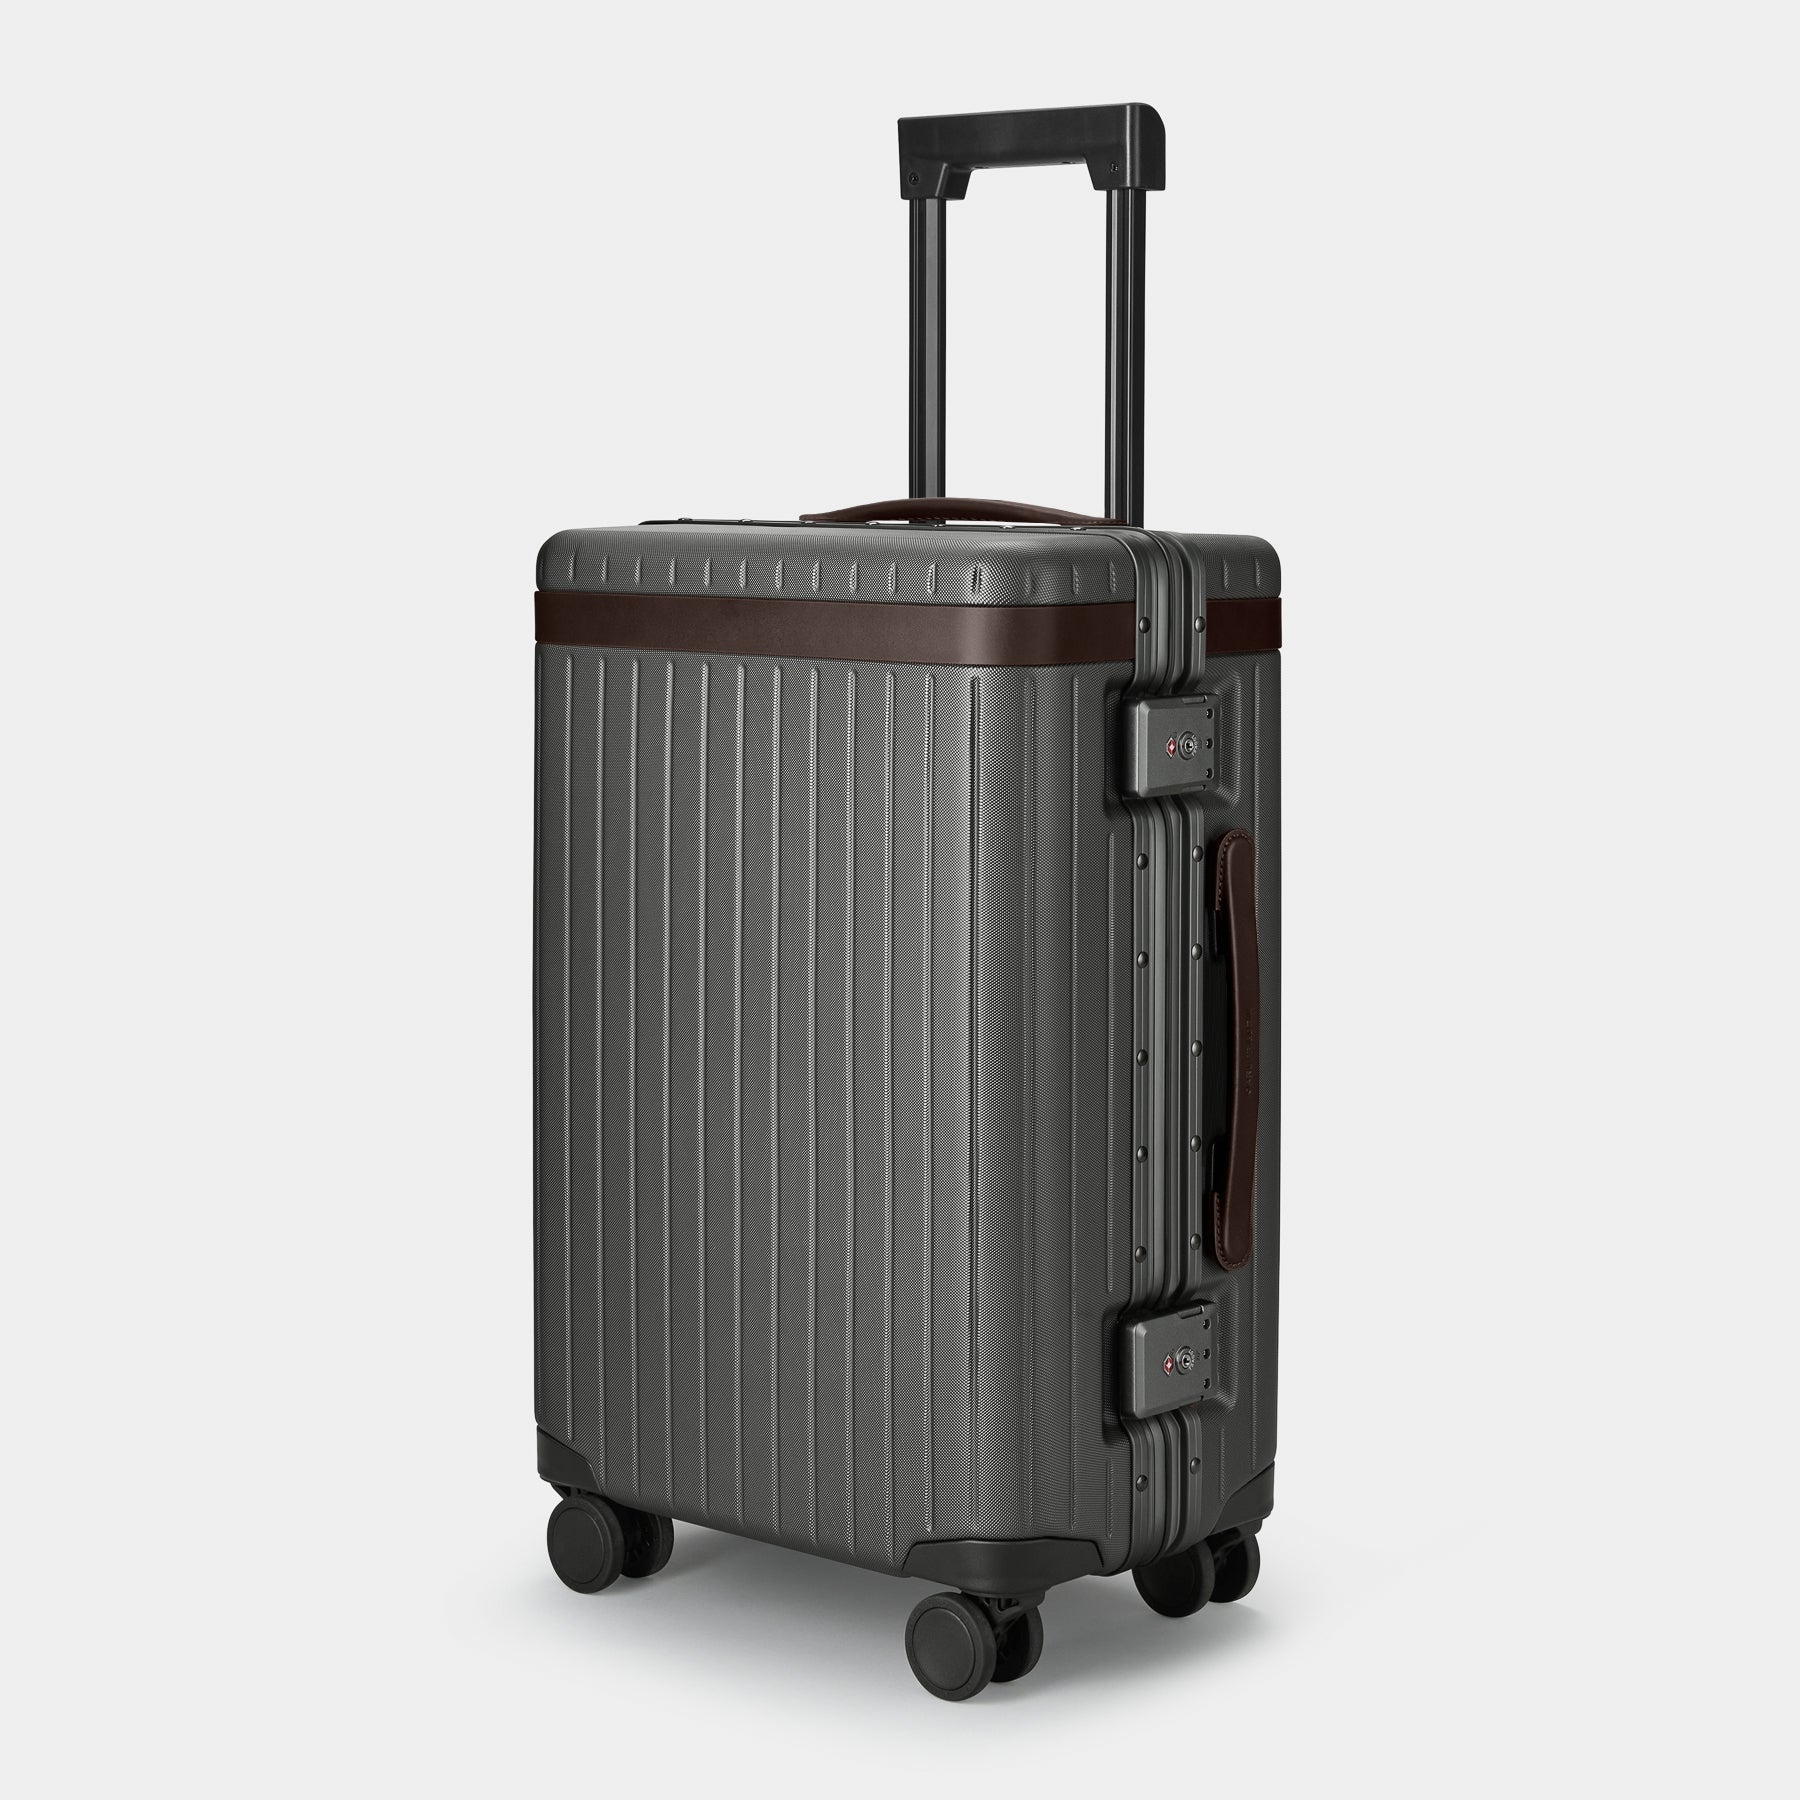 The Carry-on - Sample Chocolate Dark grey polycarbonate suitcase - Excellent Condition